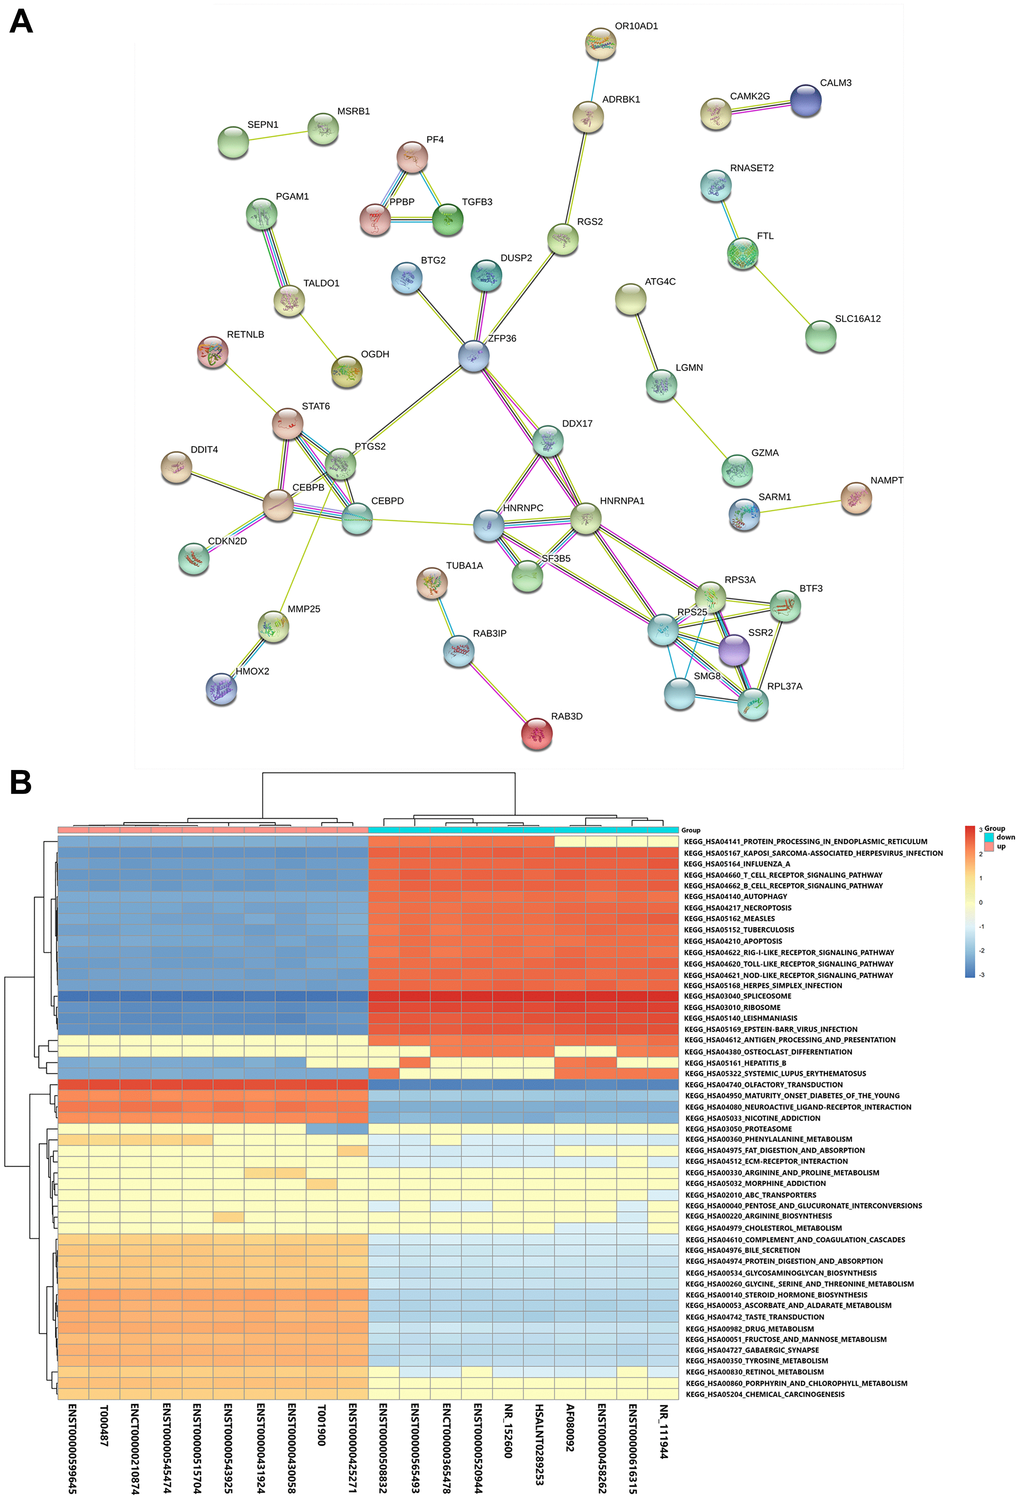 Functional and pathway analyses. (A) Protein-protein interaction network of the DE mRNAs. (B) GSEA of the top 10 DE lncRNAs based on their fold-changes.